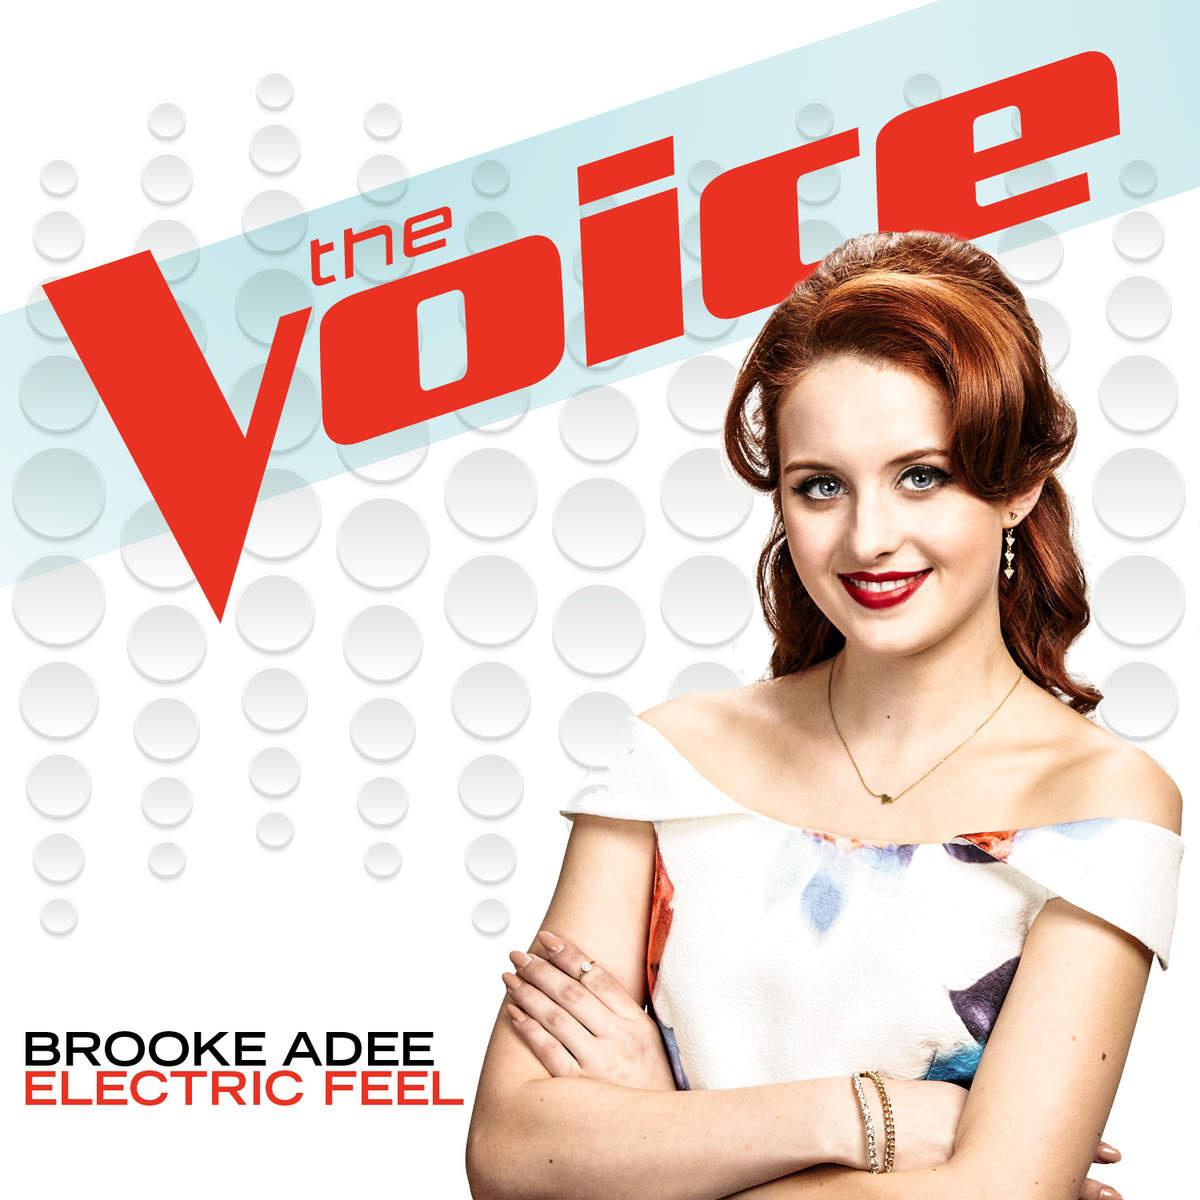 Brooke Adee - Electric Feel (The Voice Performance)